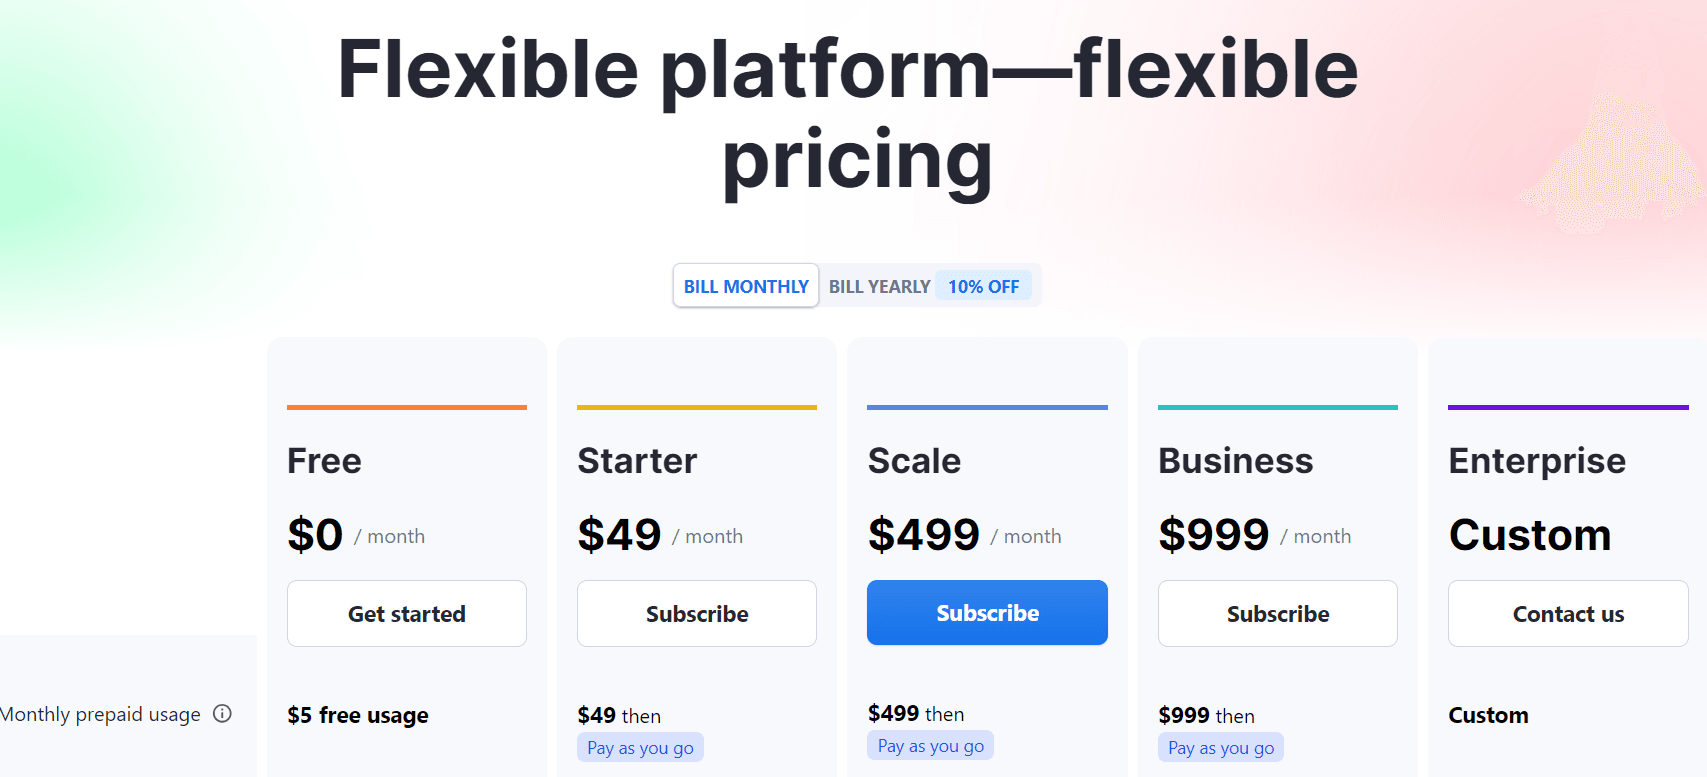 apify pricing - image2.png